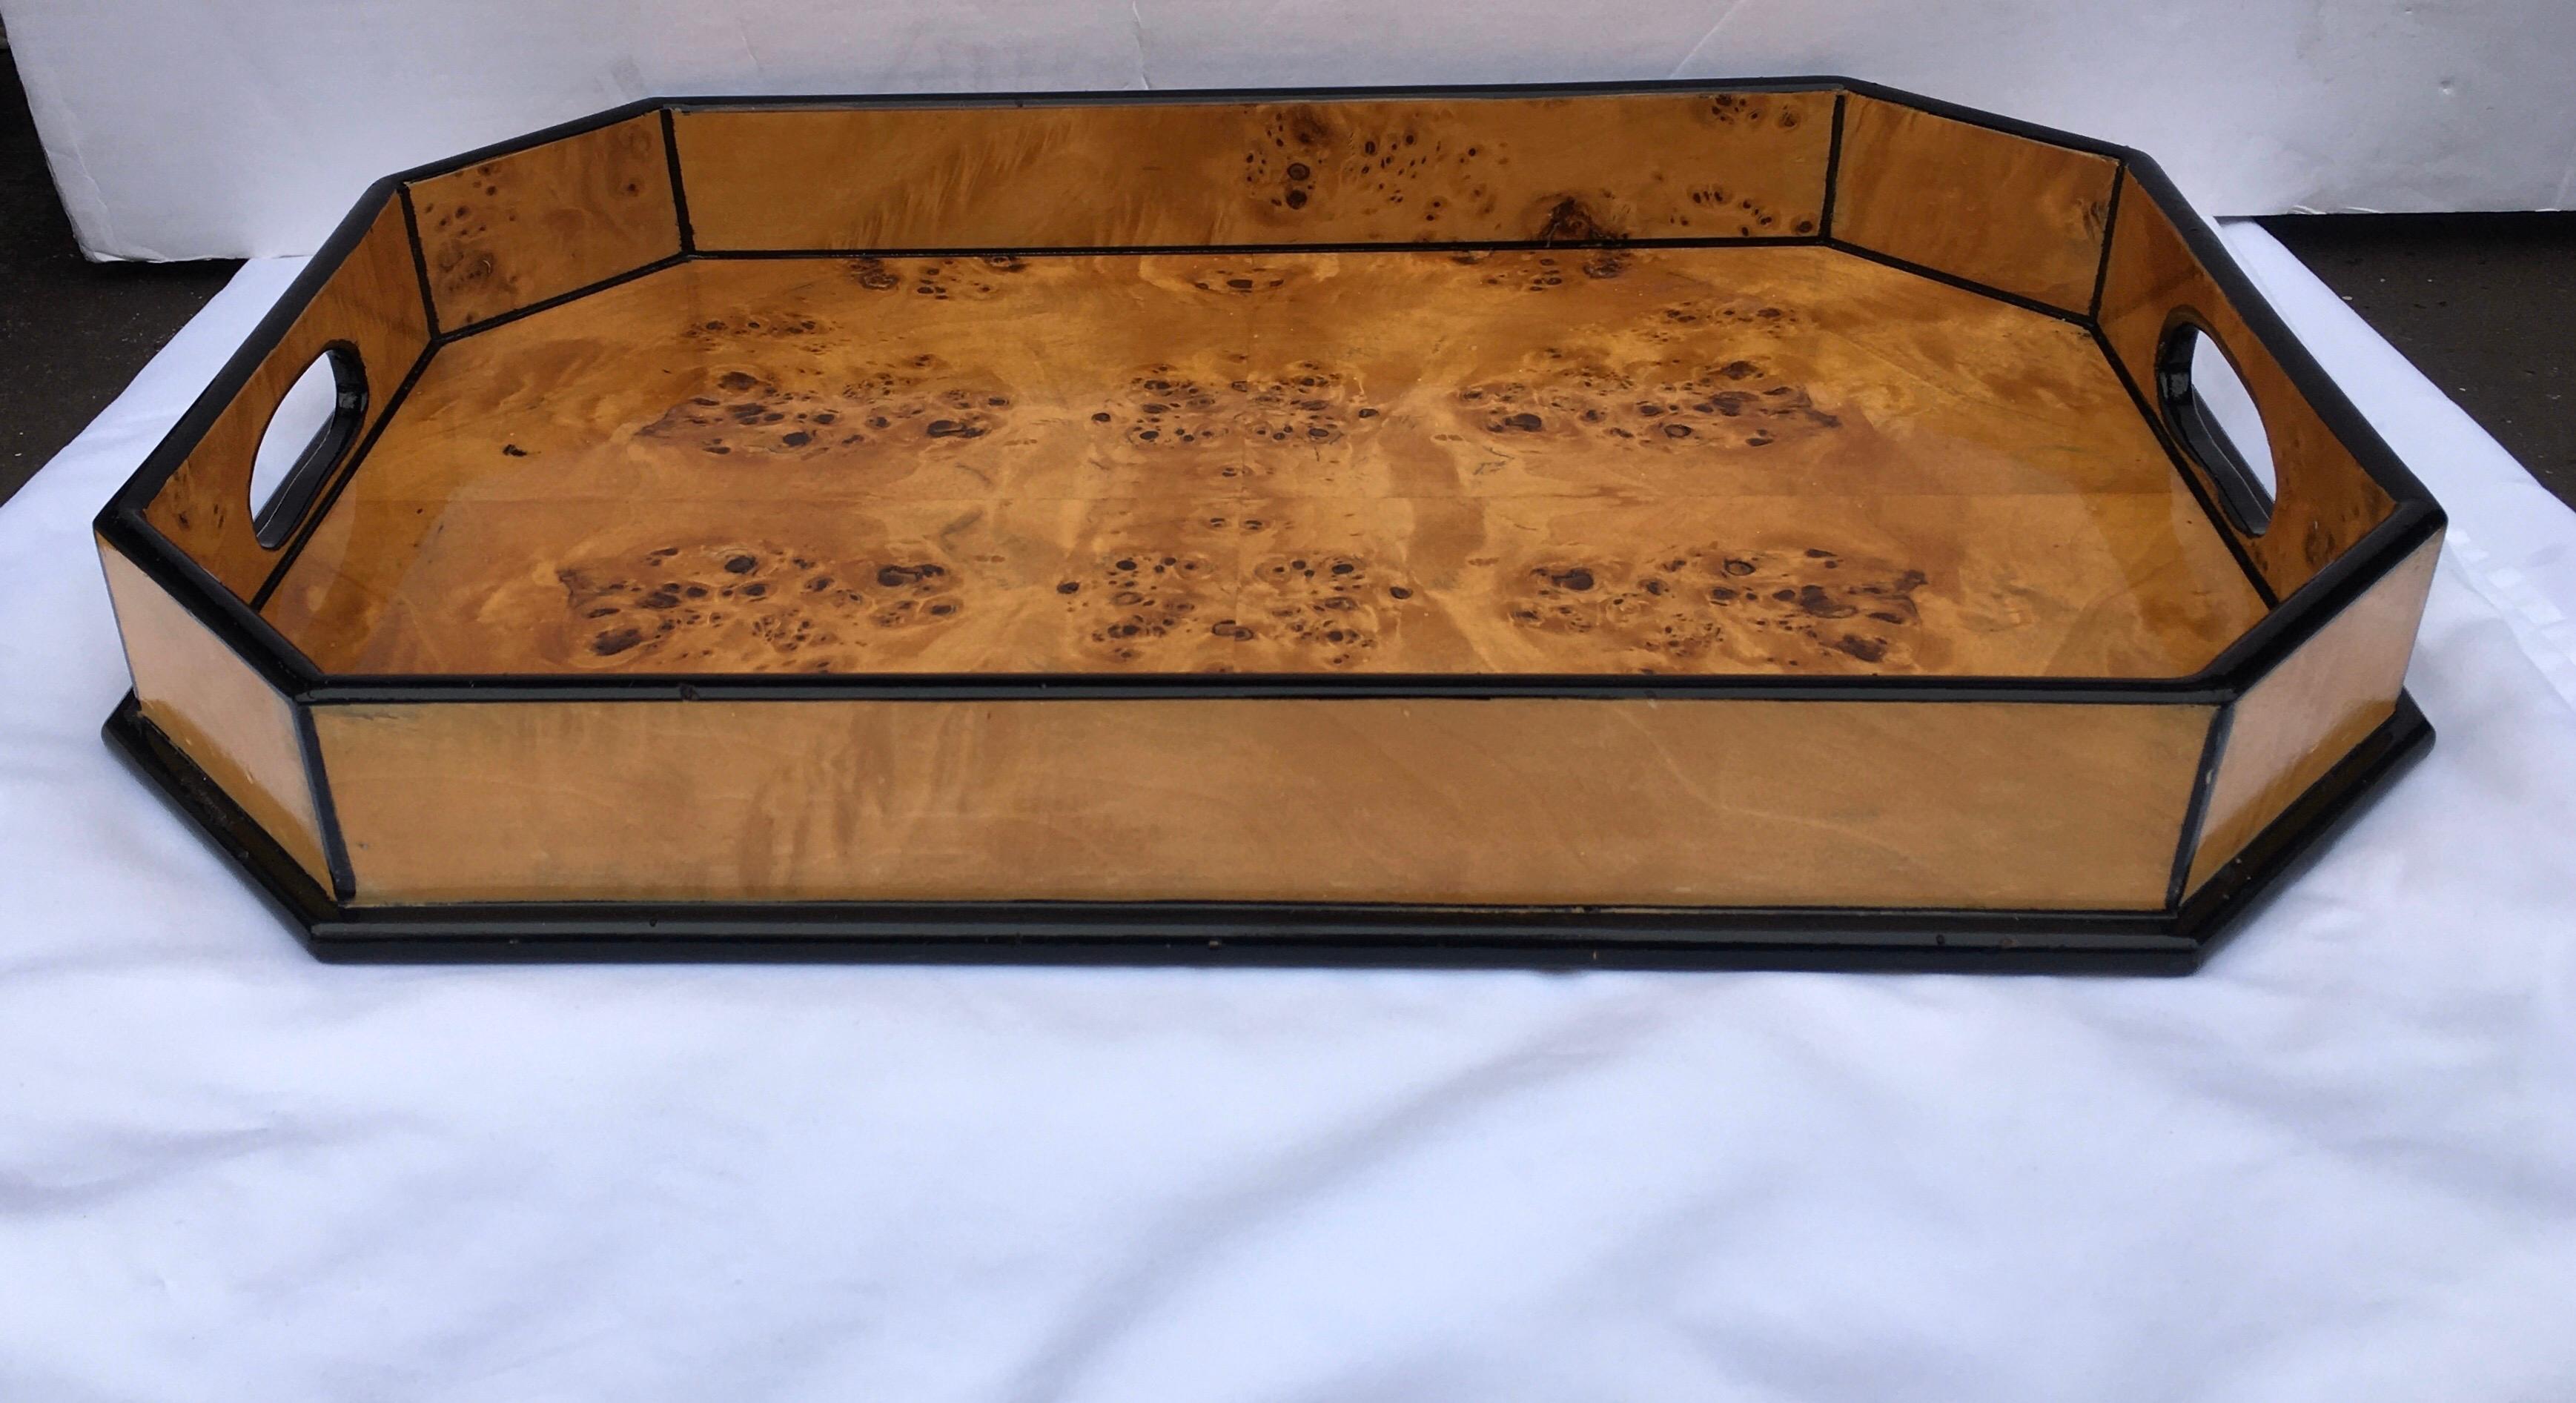 Vintage burl wood serving tray in the style of Tommaso Barbi. This octagon shaped bar ware tray features a lacquered gloss finish with black trim detailing. A handsome serving or bar piece. Would also make a beautiful ottoman tray.